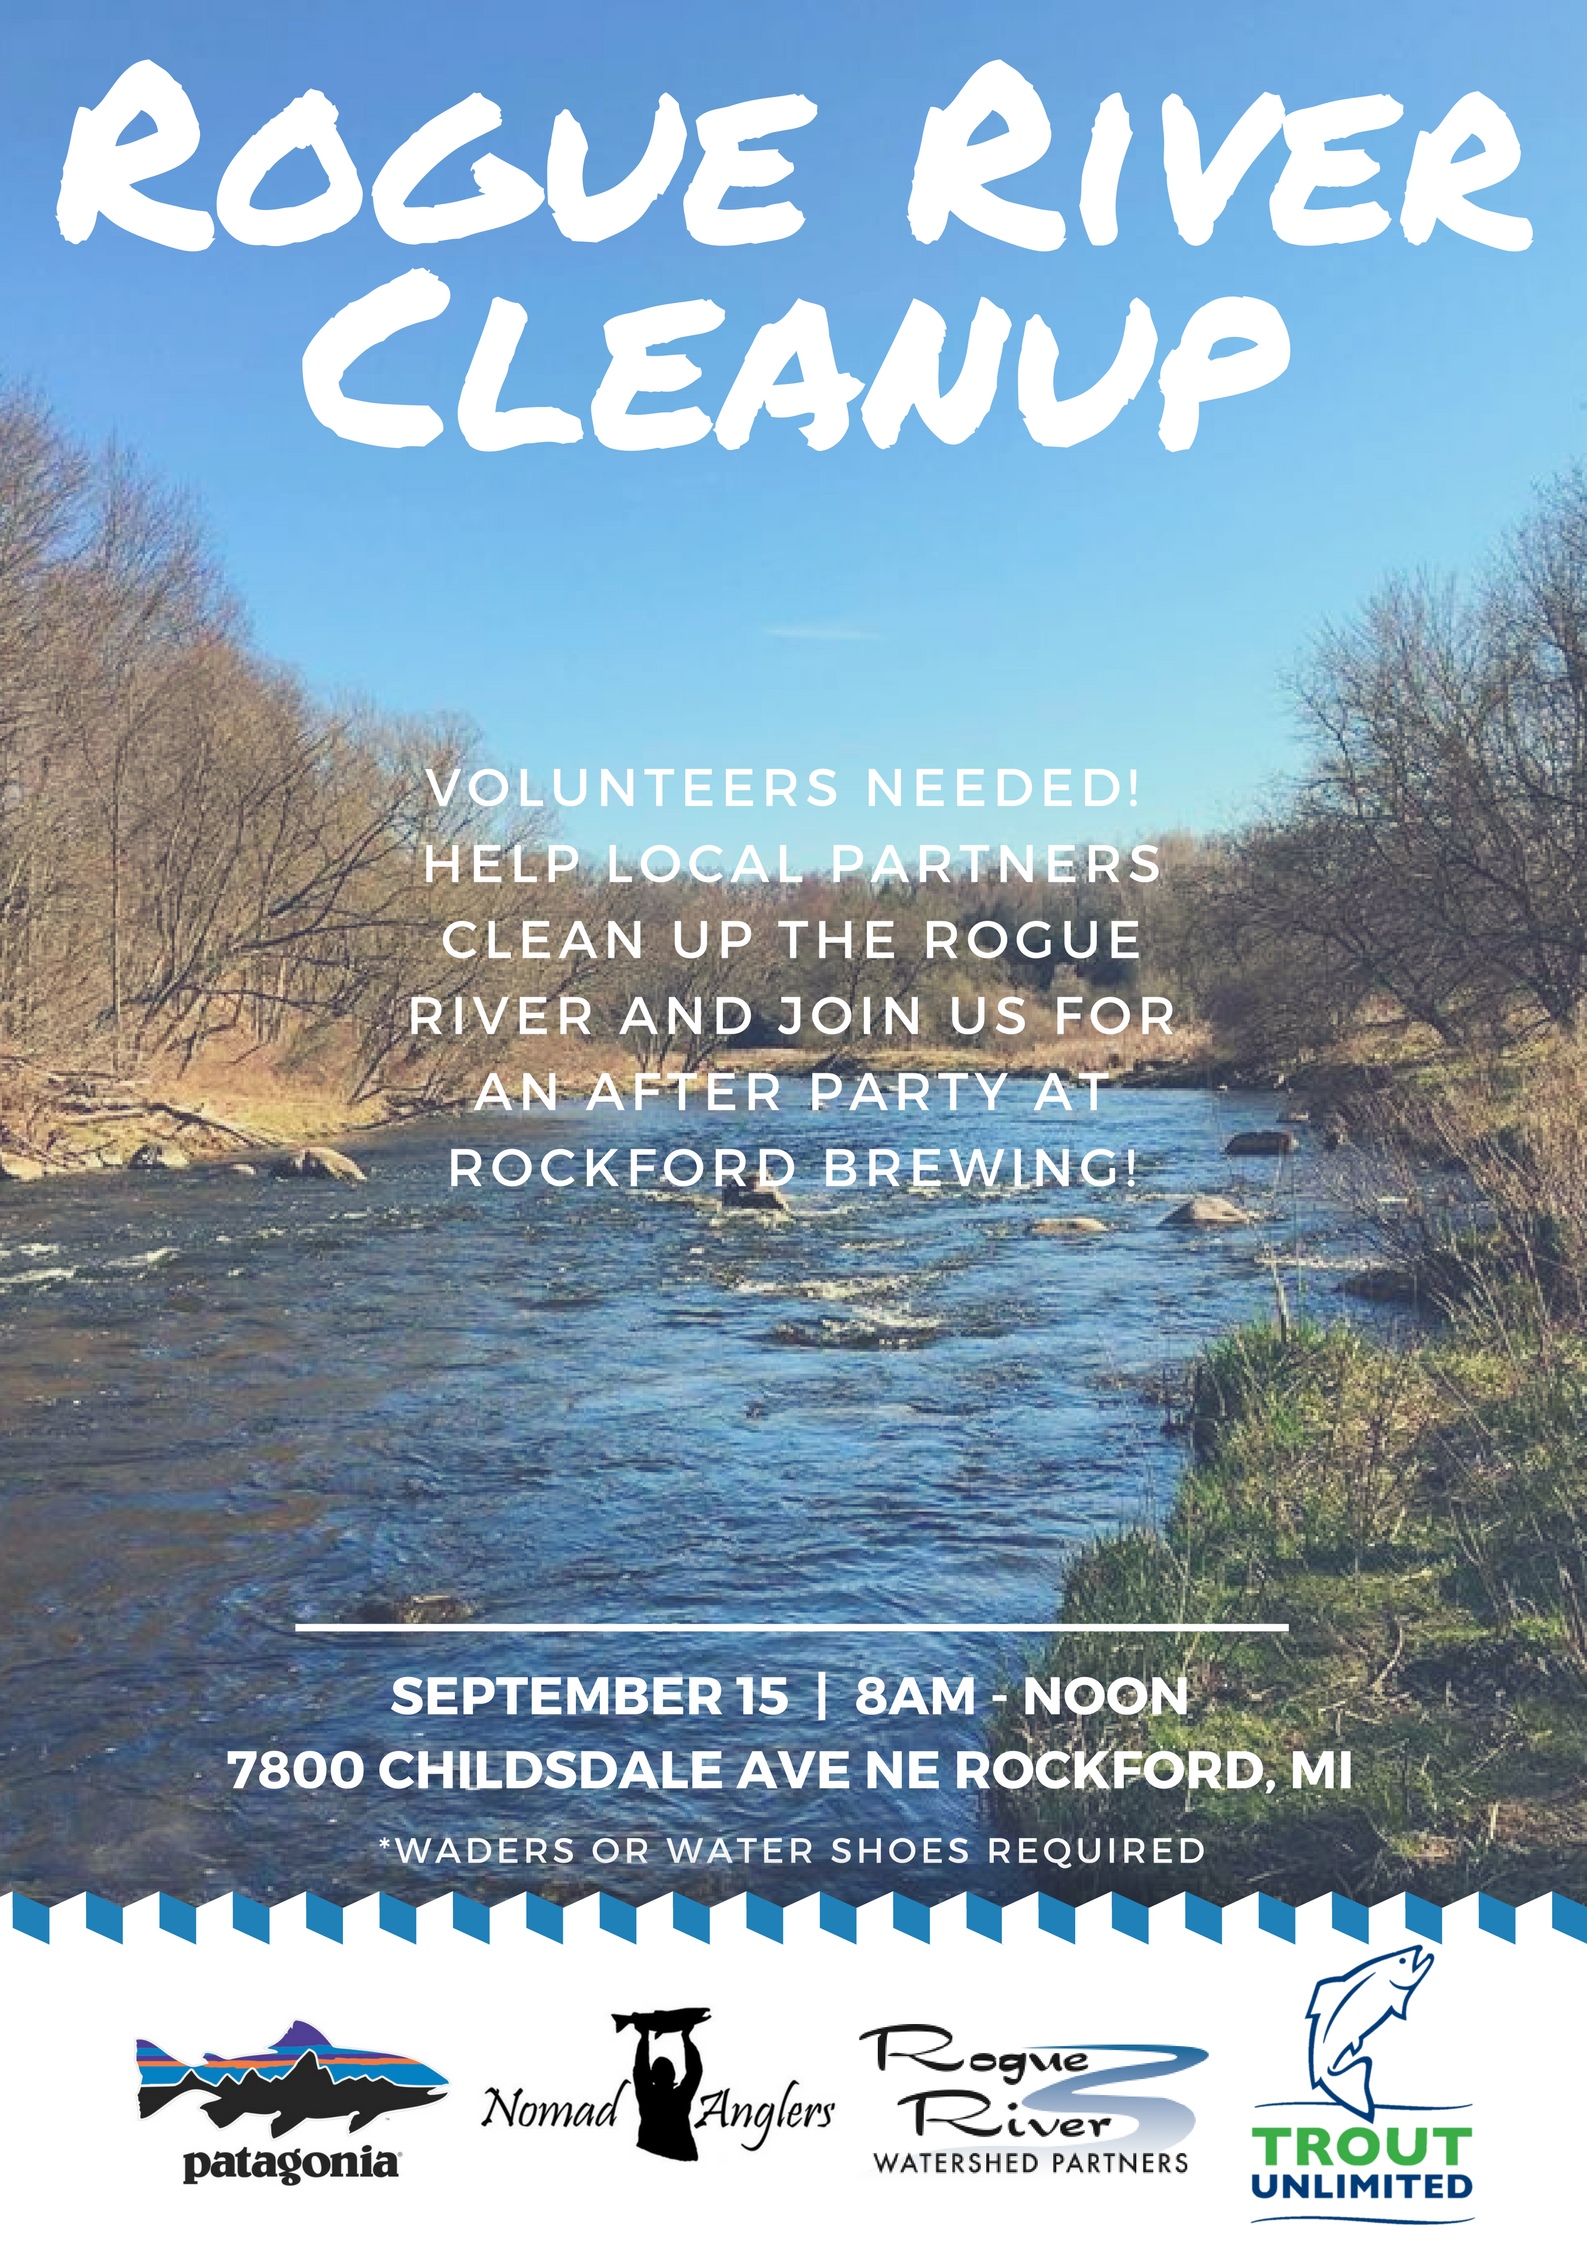 Rogue River cleanup on Sept 15